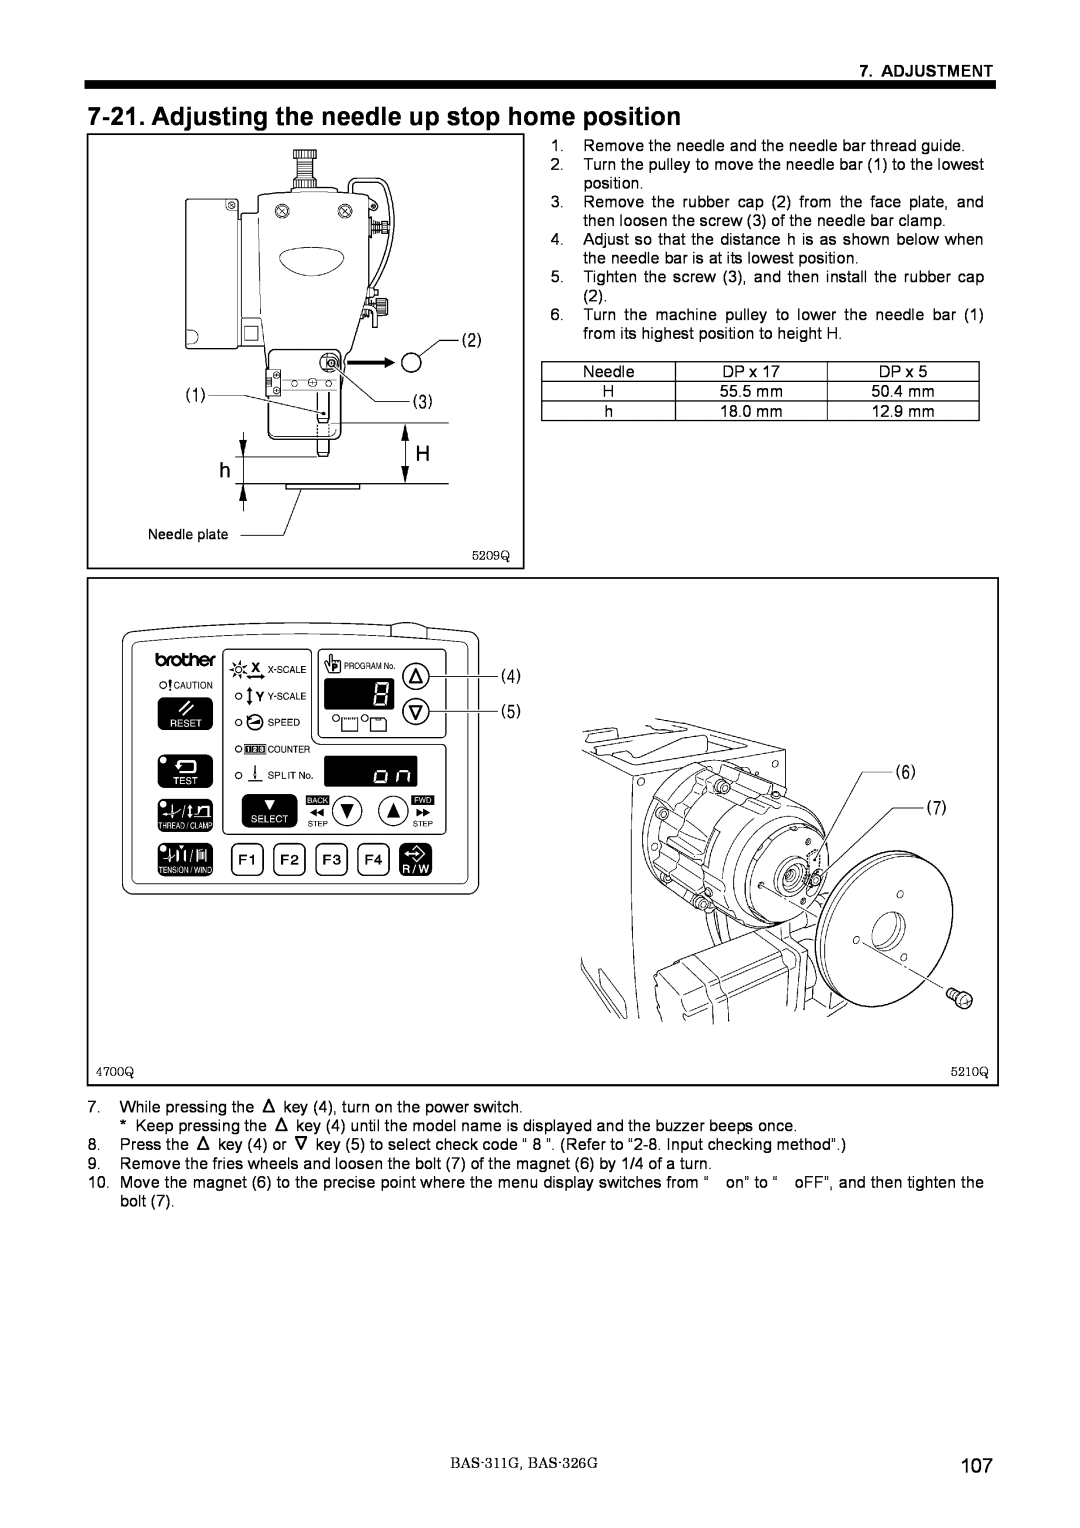 Brother BAS-311G service manual Adjusting the needle up stop home position, Adjustment, 5209Q, 4700Q, 5210Q 